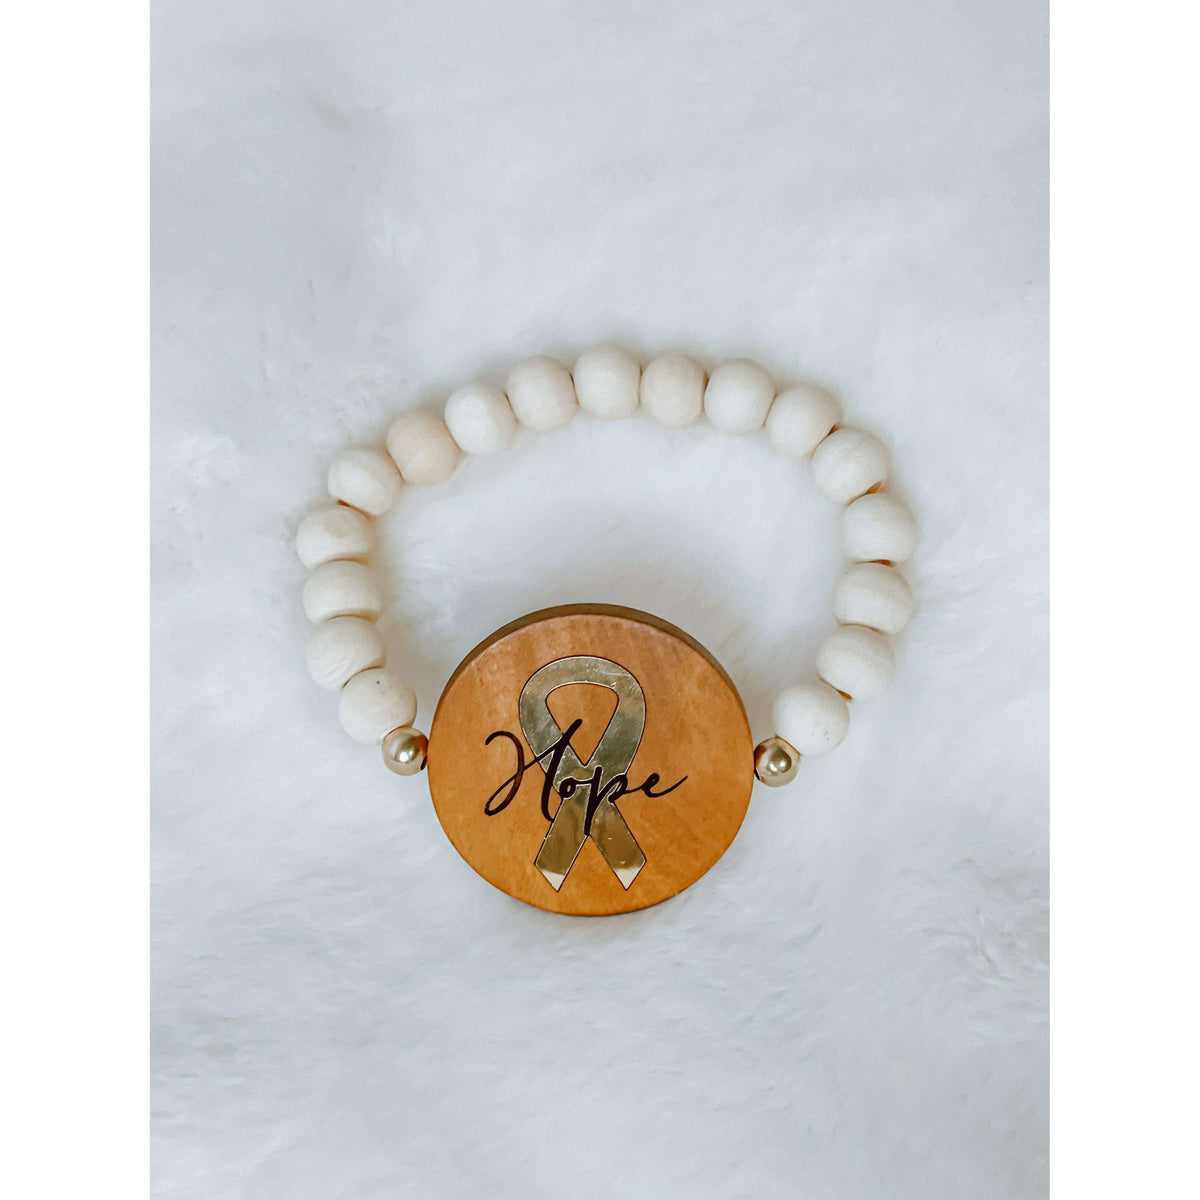 Childhood Cancer Awareness HOPE Bracelet - The Hive by Chris Jesselle